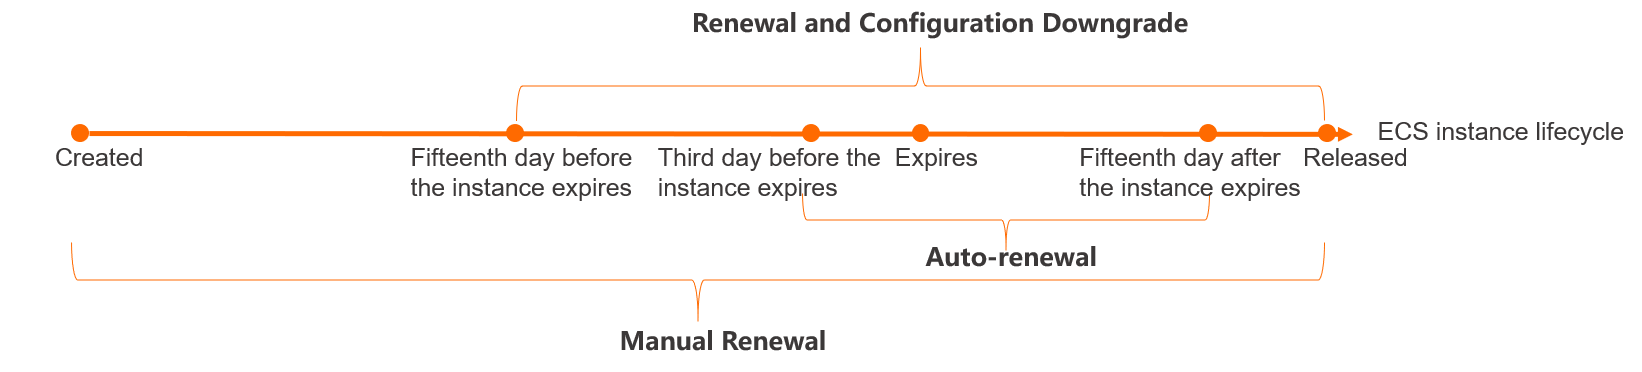 Renewal methods for instances on the International site (alibabacloud.com)